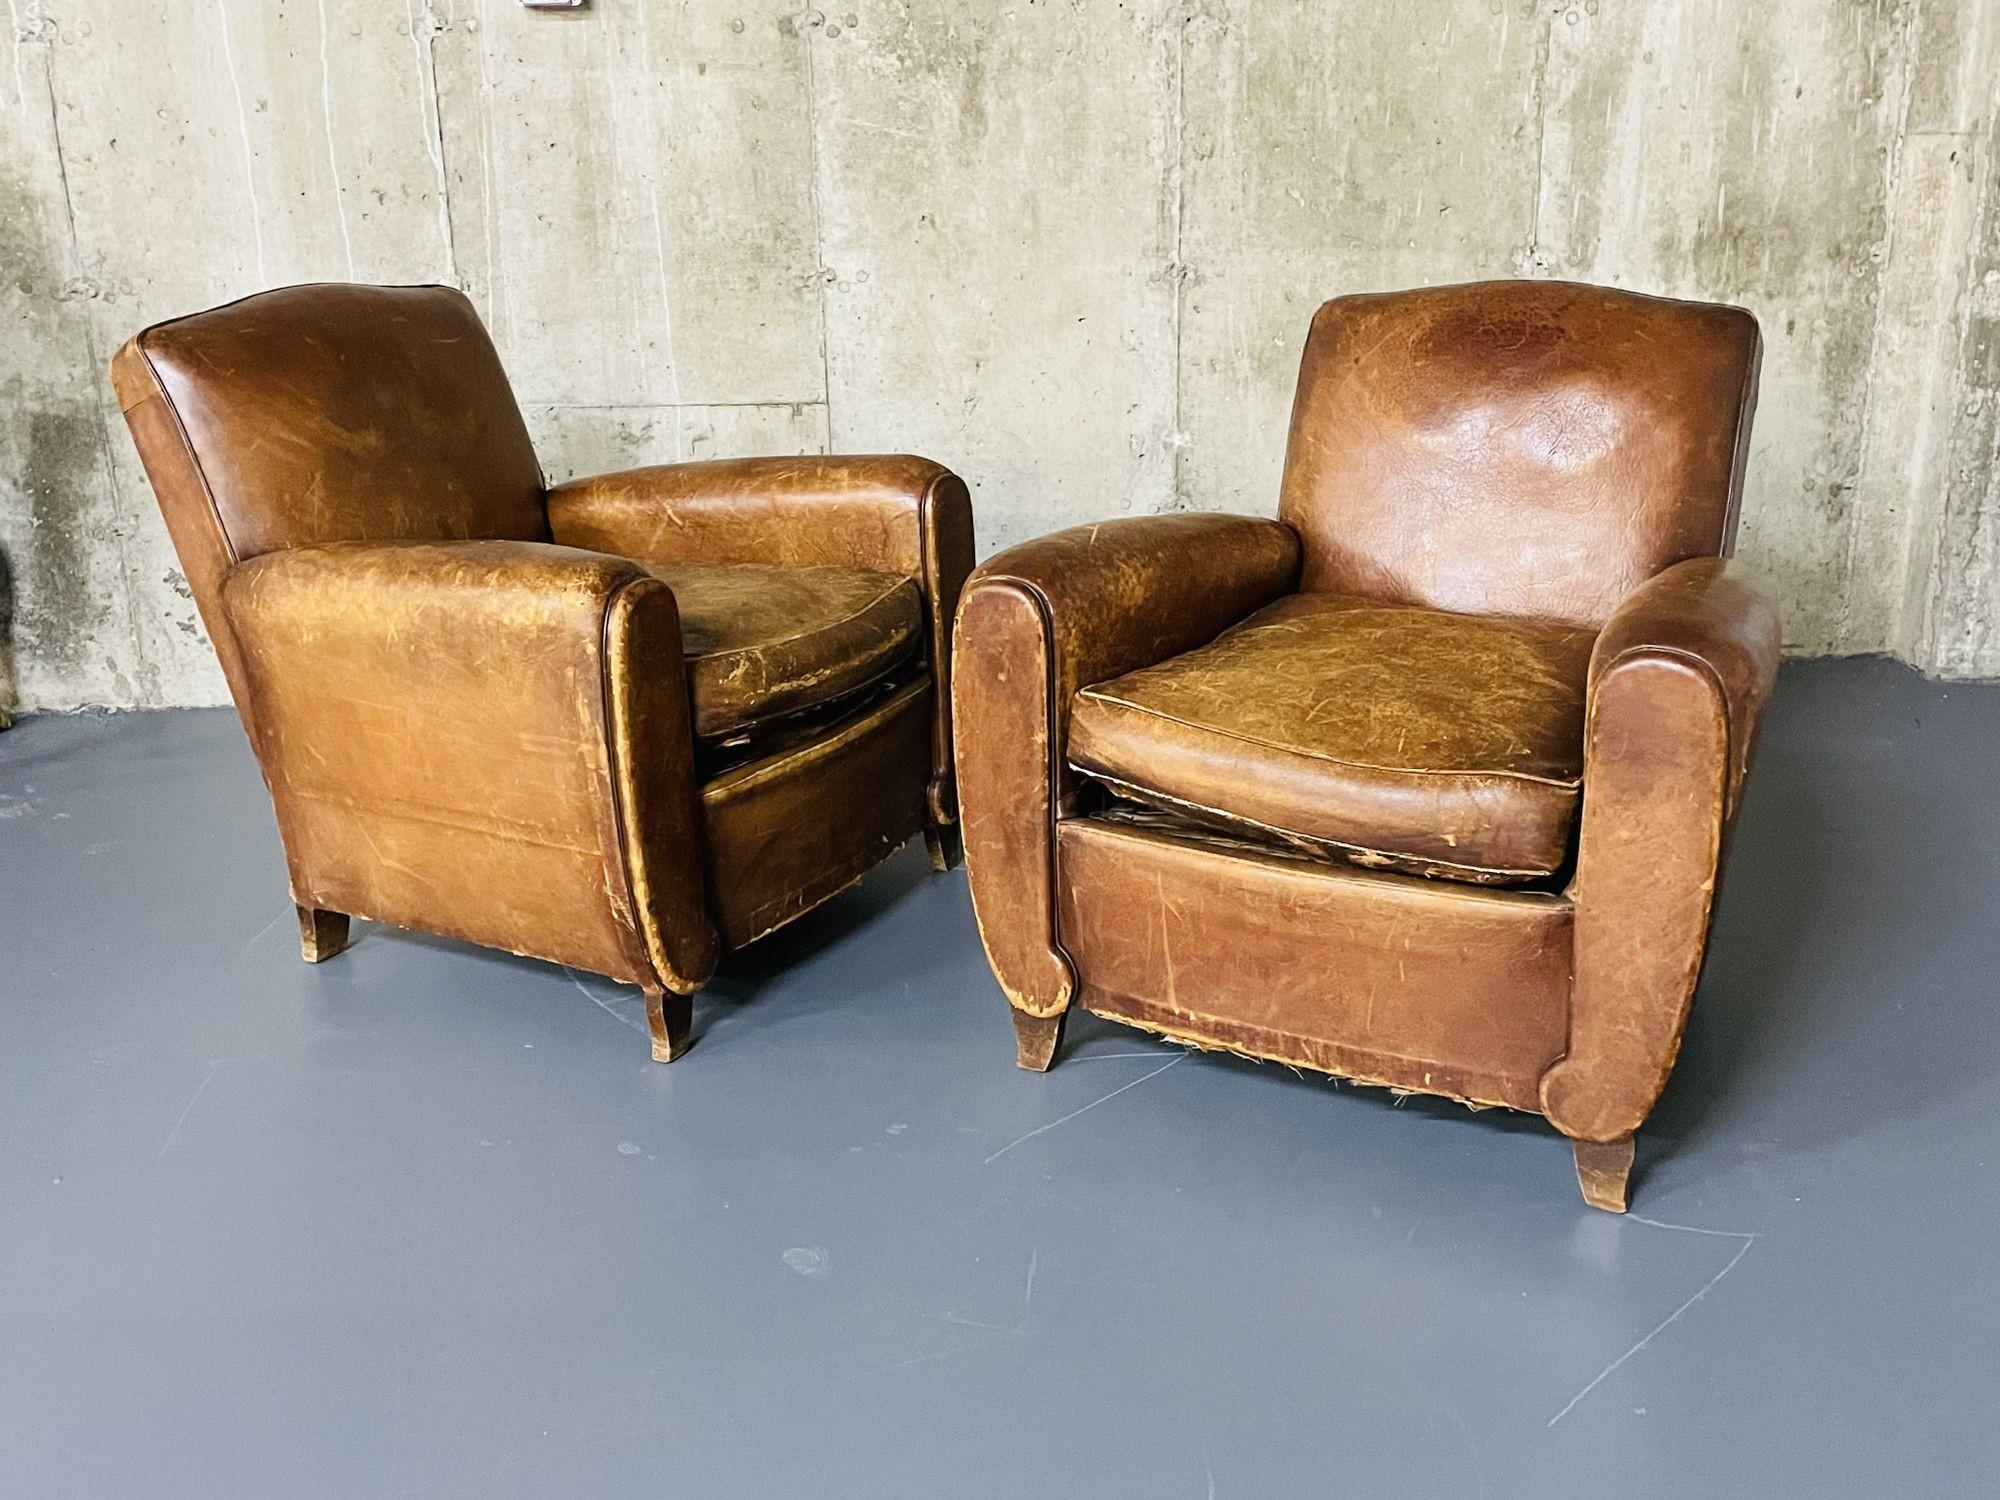 Pair of French Art Deco Distressed leather club / lounge chairs, Patinated
 
Fantastic pair of worn and distressed art deco original leather club chairs. No apparent tears in the surface of the leather. Original Air-Sea packing labels on underside